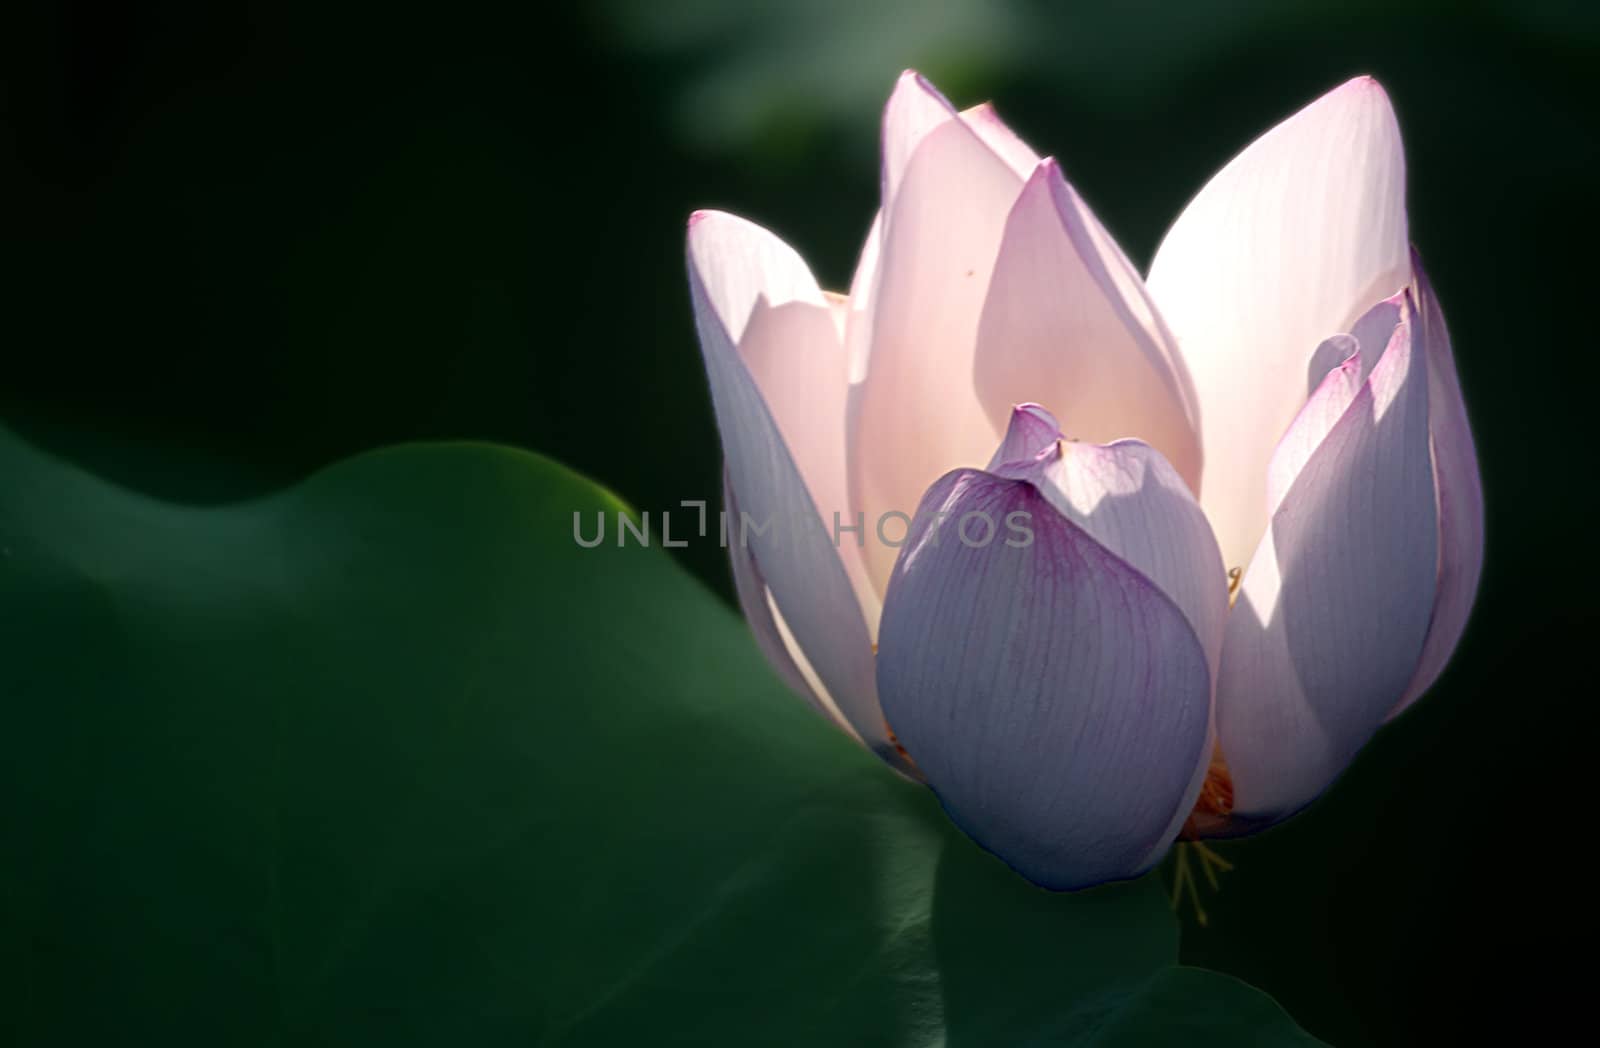 Lotus flower isolated on a black background Photo taken on: June, 2008